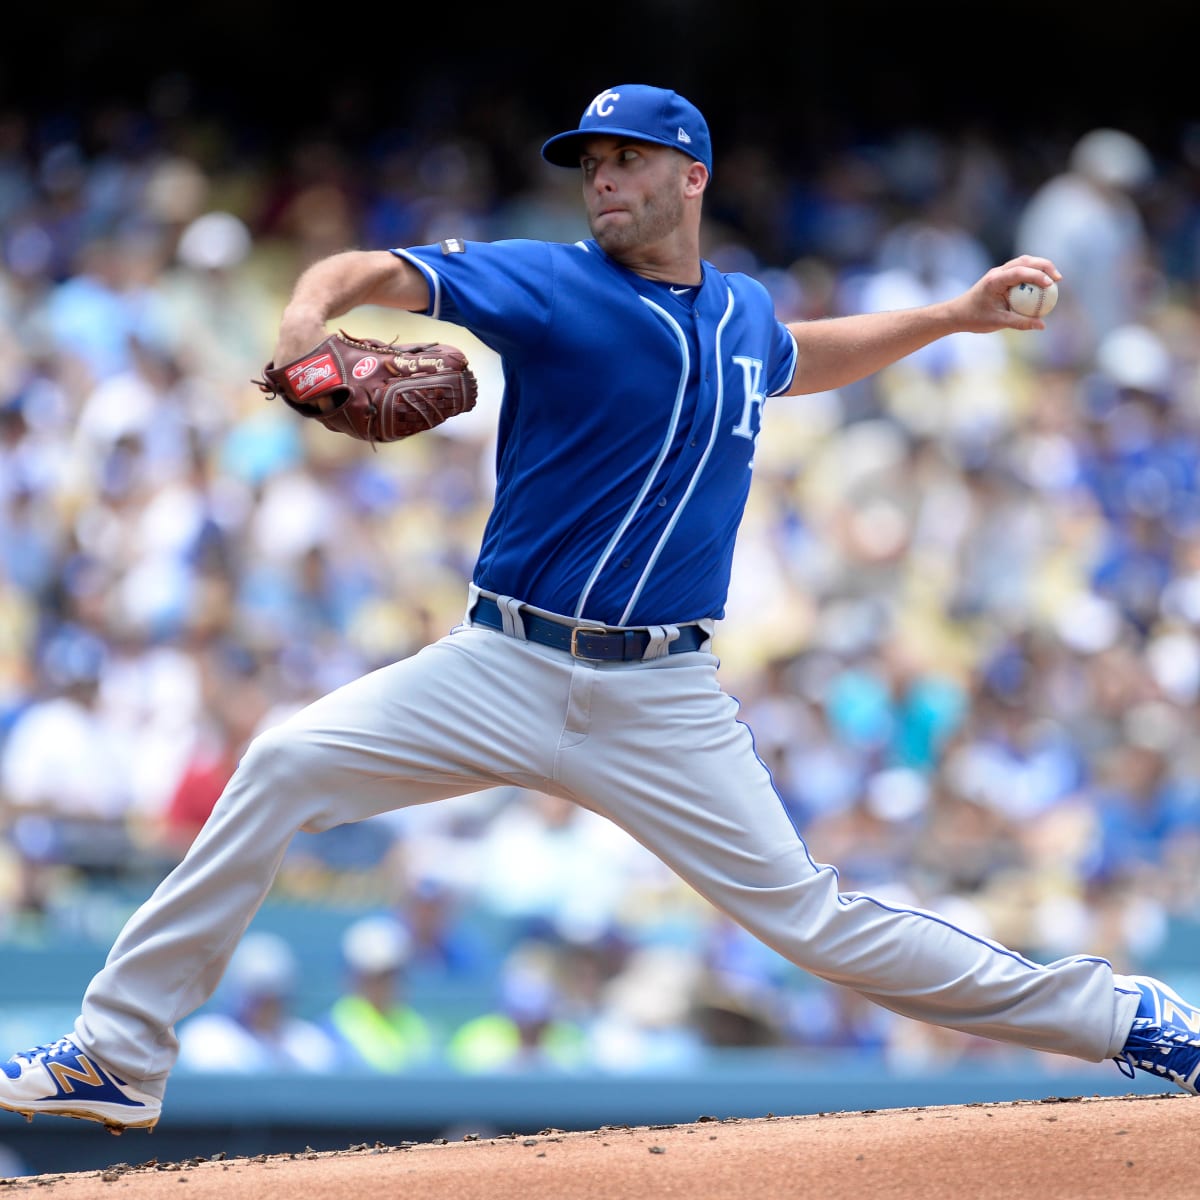 Dodgers Re-Sign One Of Their Best Pitchers